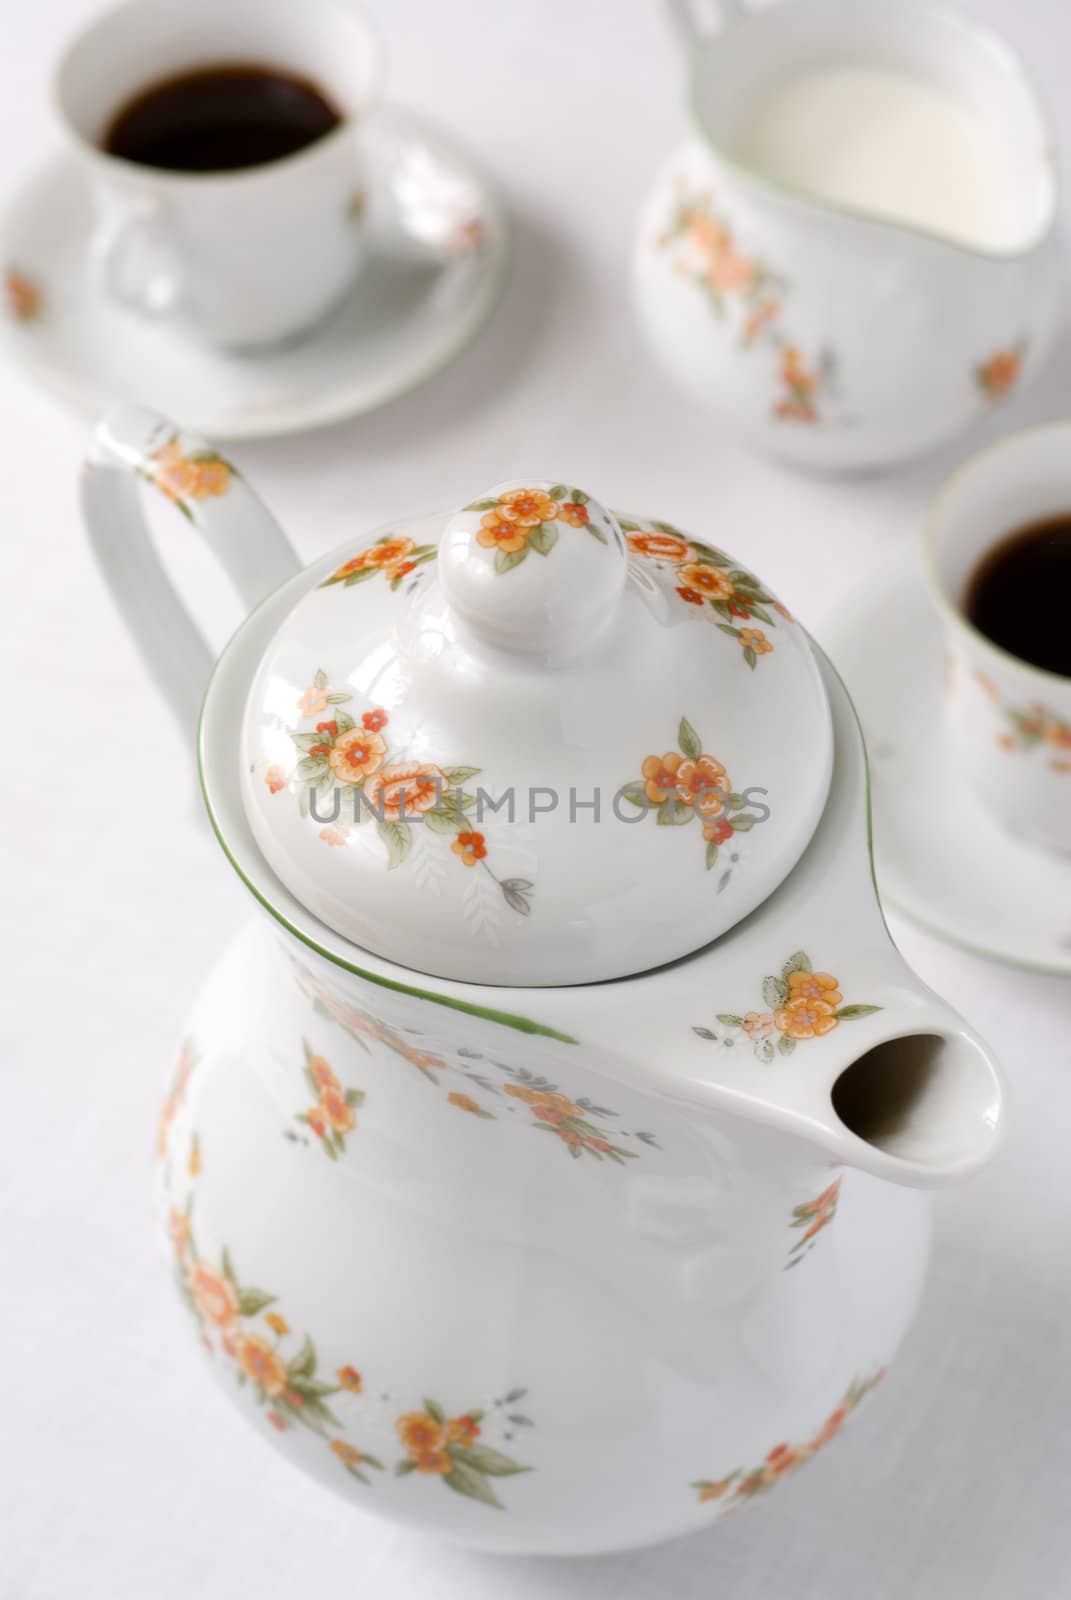 Coffee or tea set on the table - teapot on the front (focus on the top of it) cups and milk jug behind. Shallow DOF.